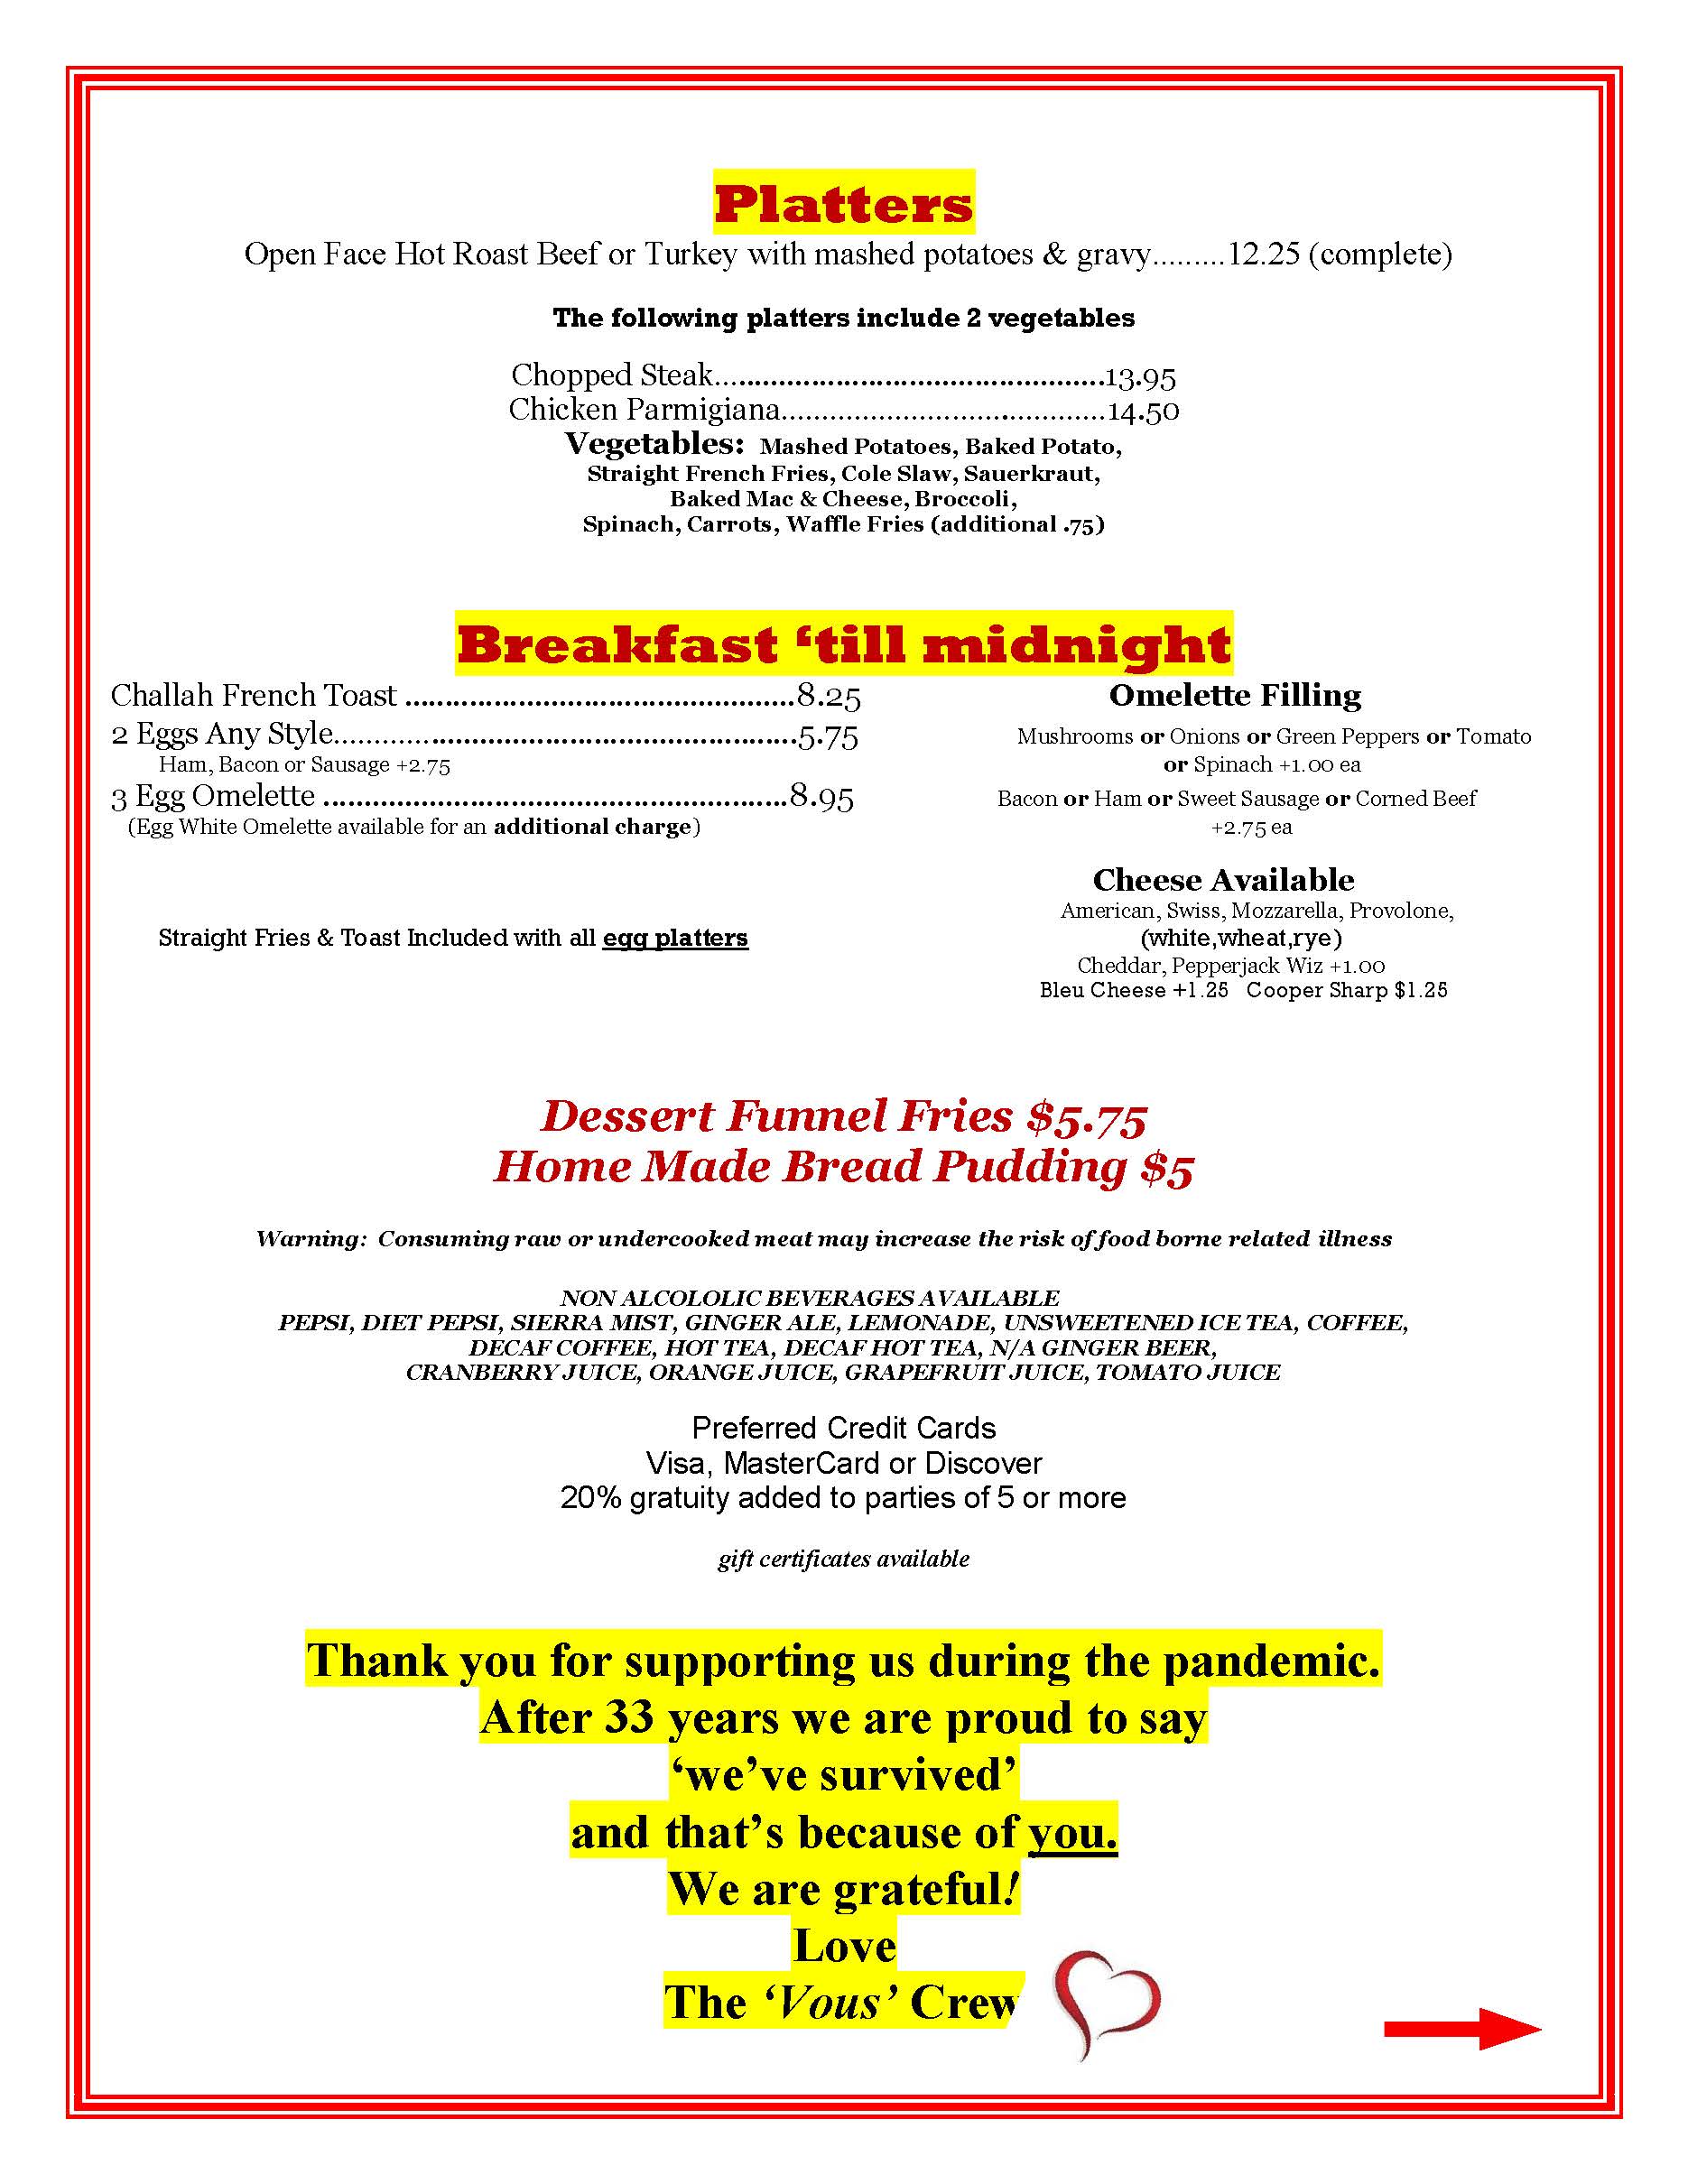 A flyer for a breakfast at midnight.